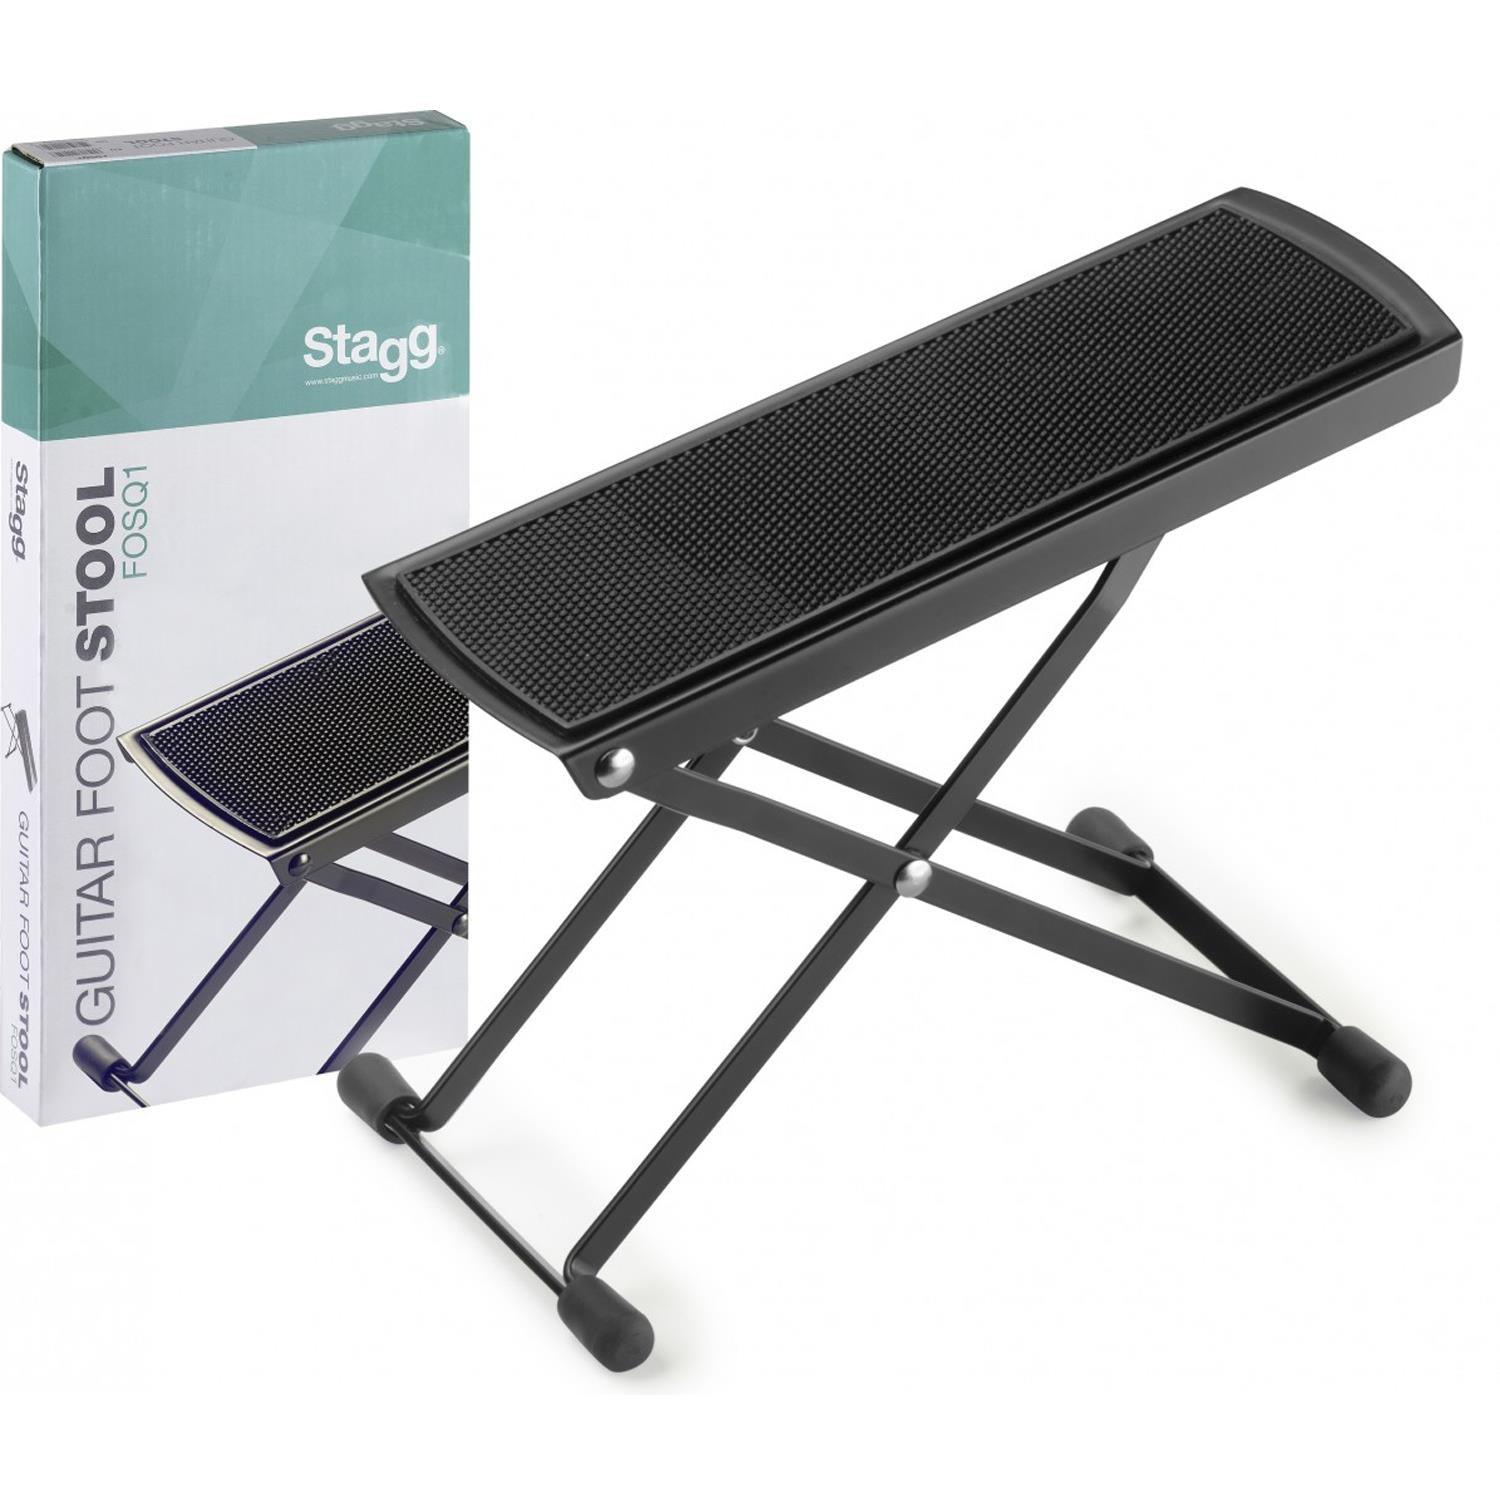 Stagg FOSQ1 Guitar Foldable Adjustable Footstool - DY Pro Audio